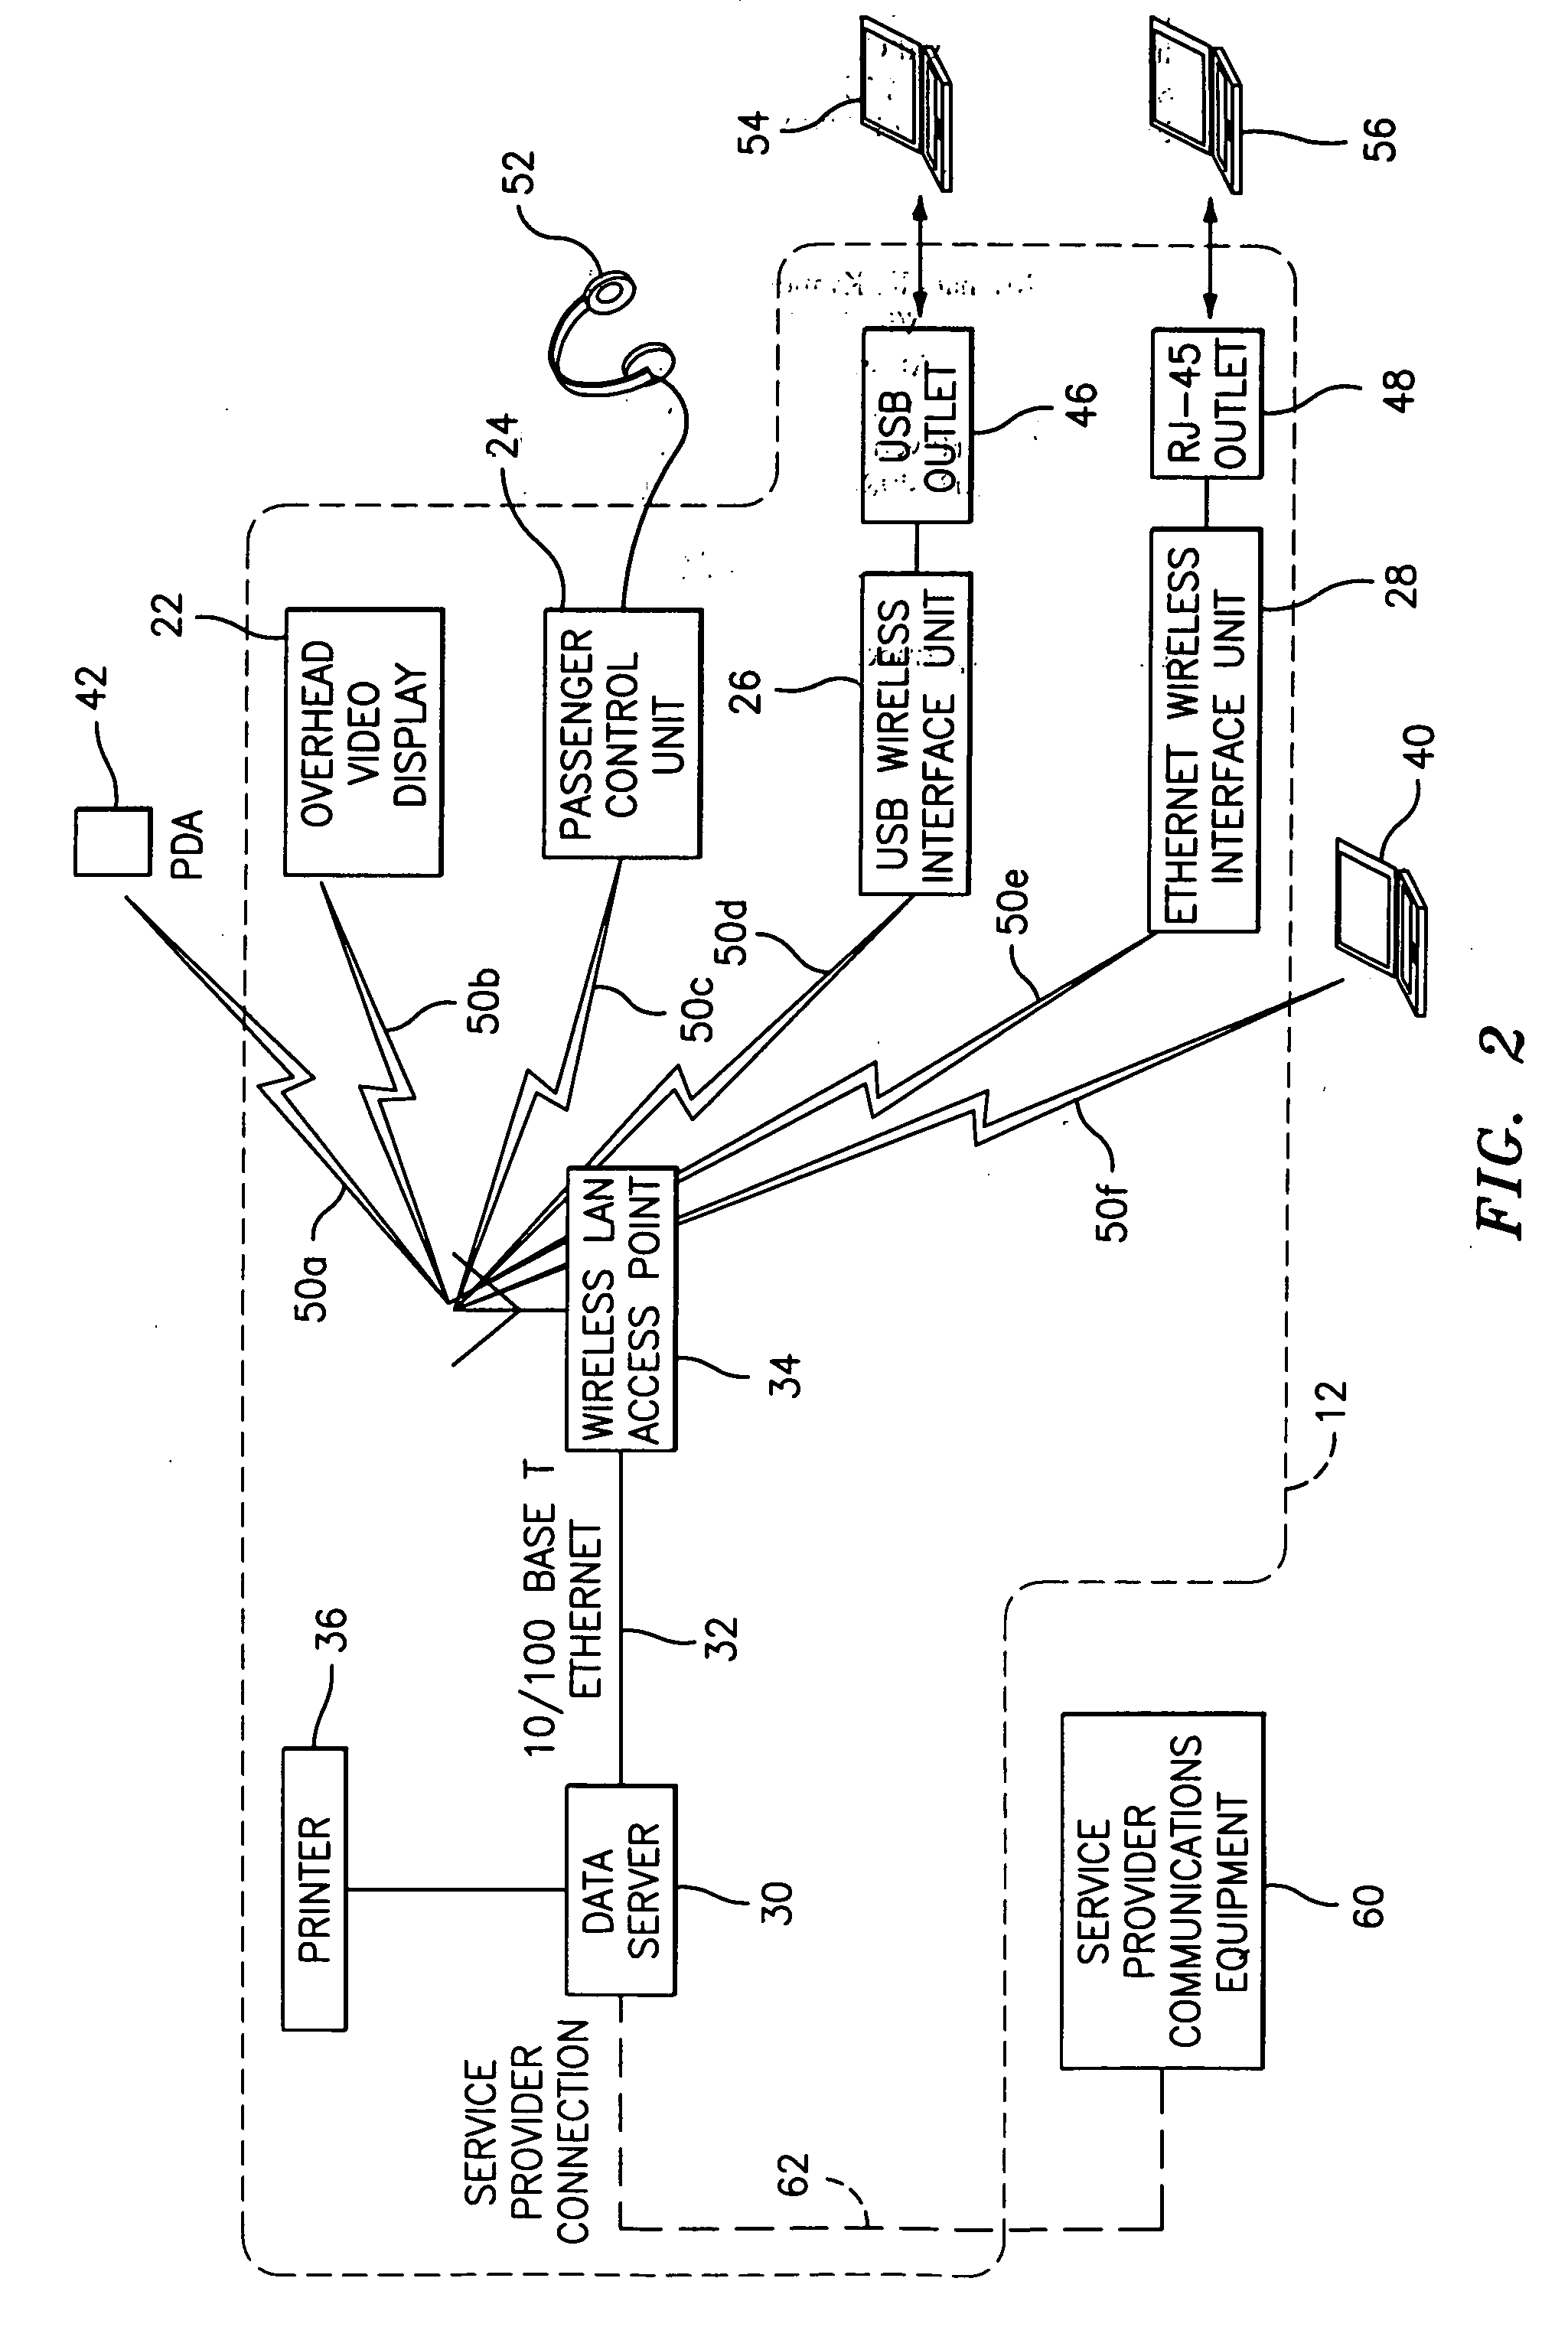 Wireless data communications system for a transportation vehicle